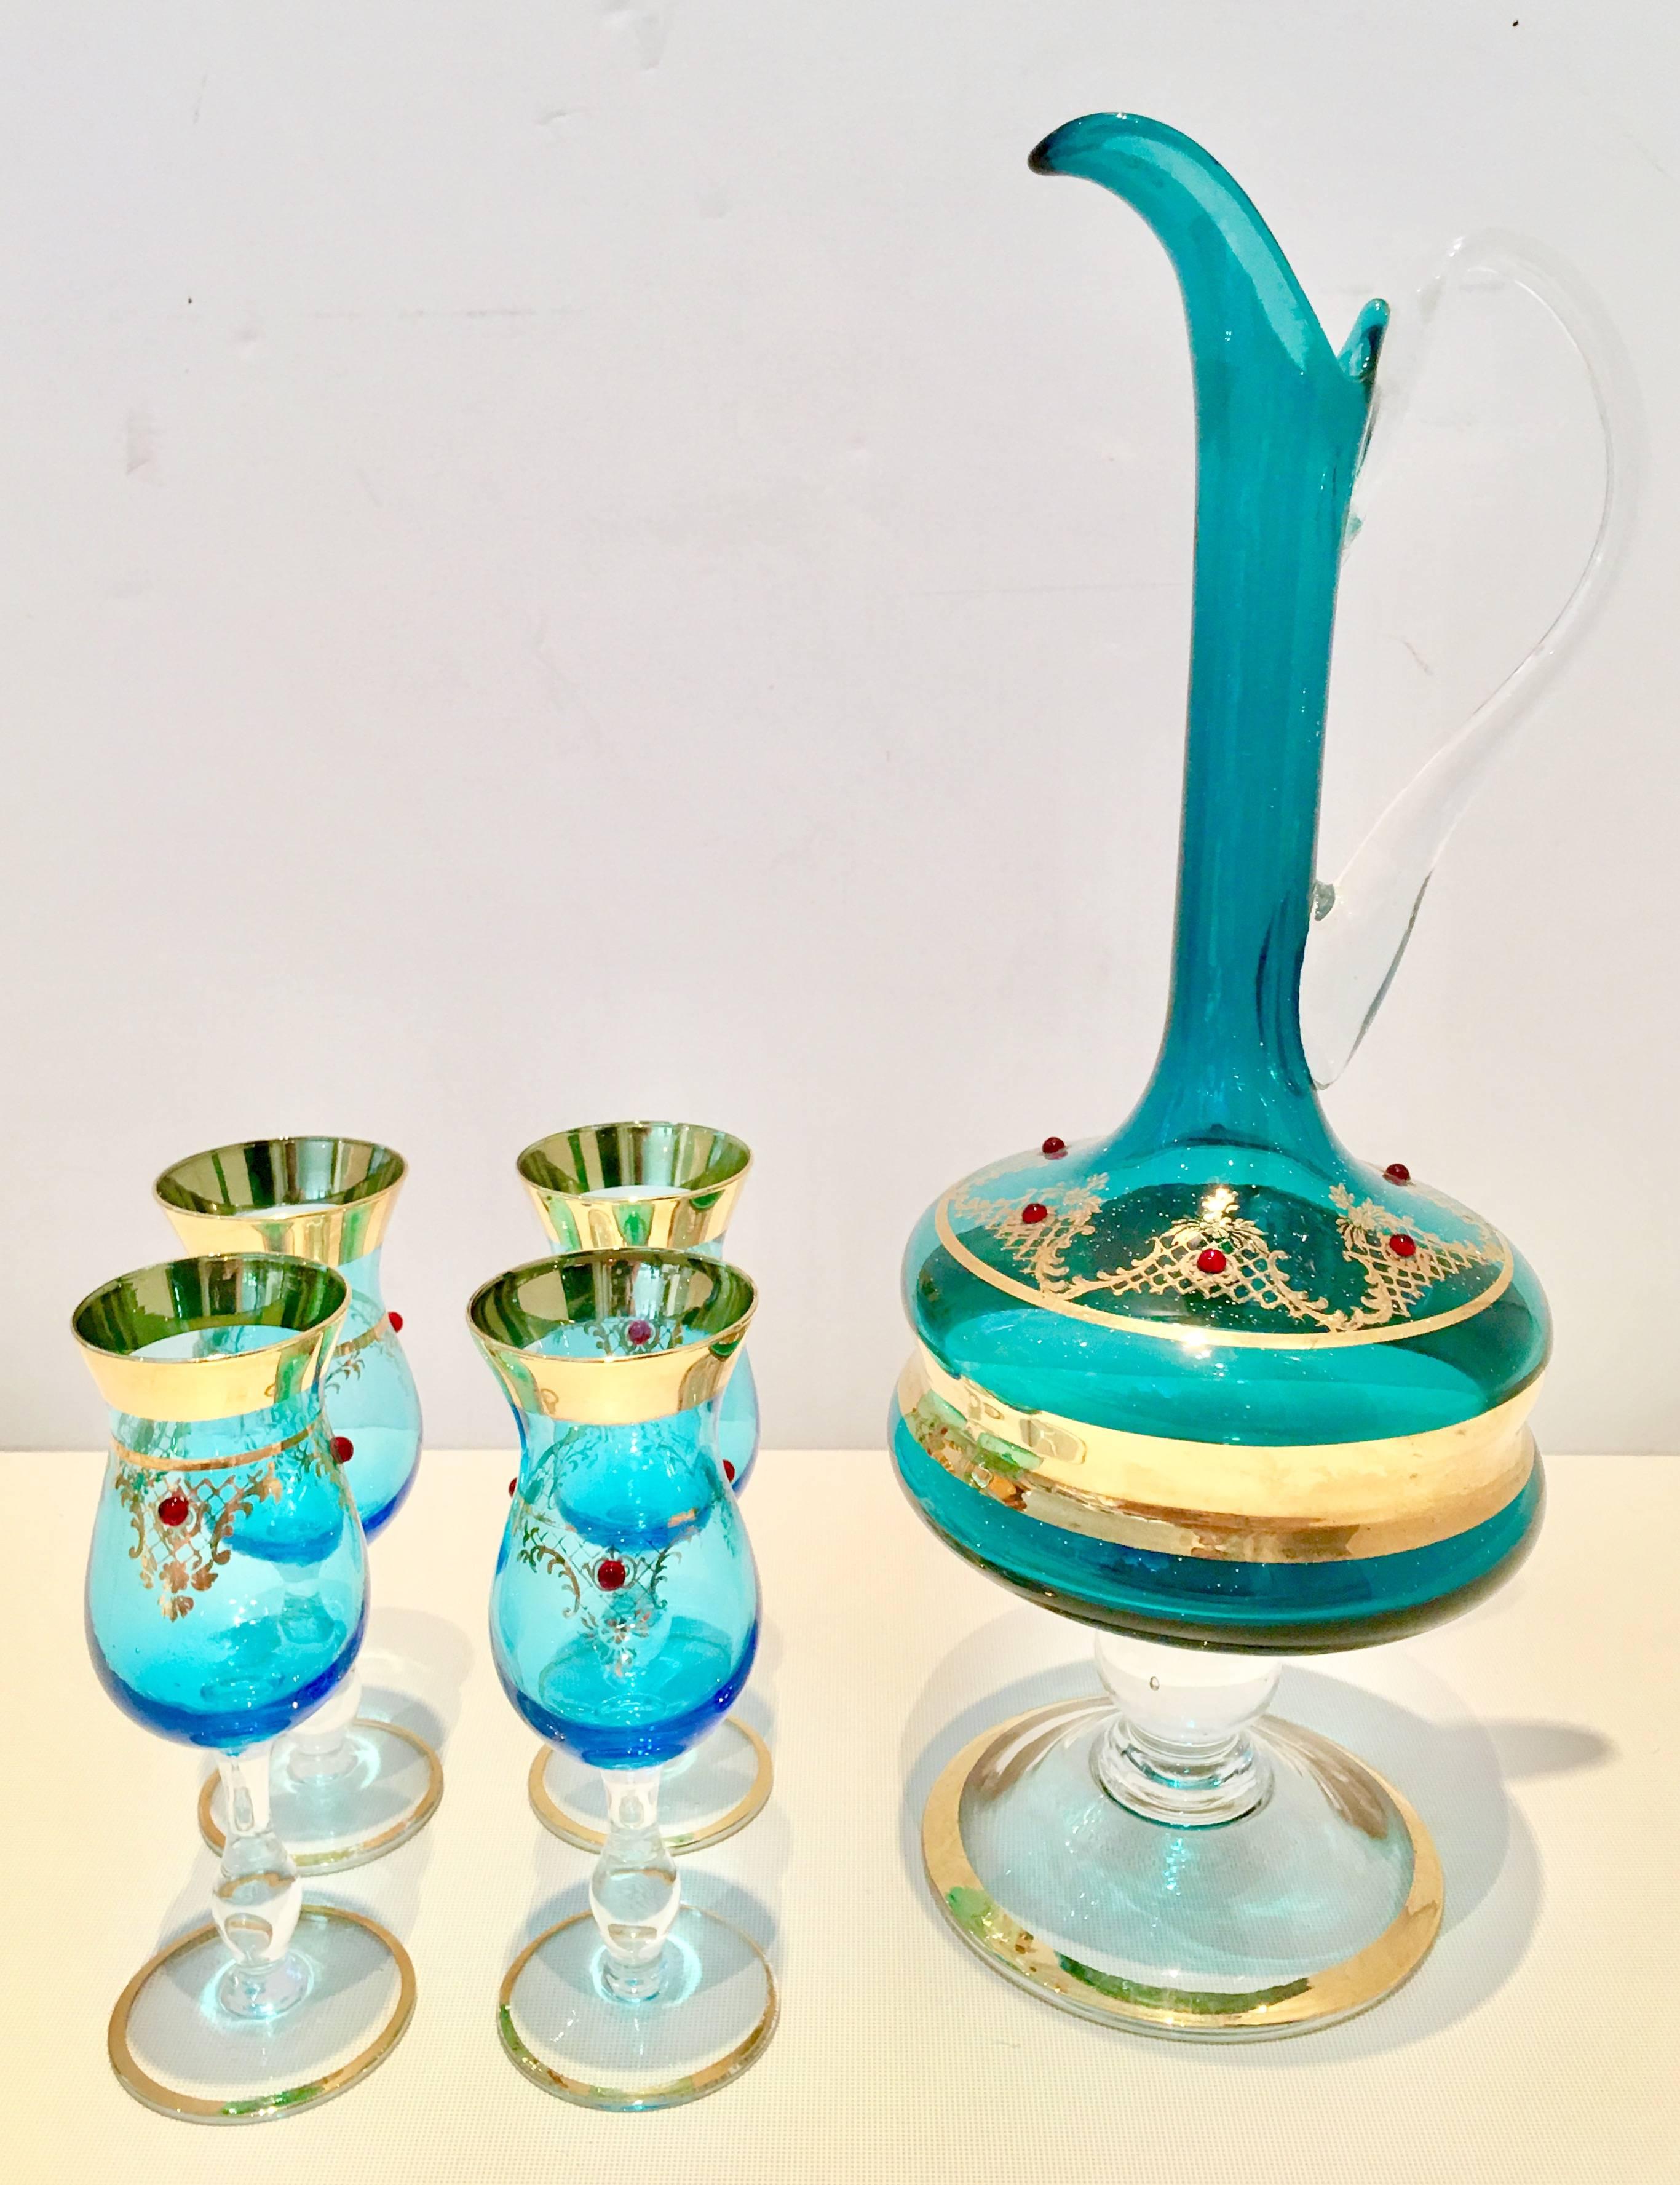 Italian Venetian glass footed and applied handled pitcher with four footed cordial stem glasses. Teal in color with generous 22-karat gold detail and apothecary style foot and modern body. The pitcher has a long spout, clear applied blown glass